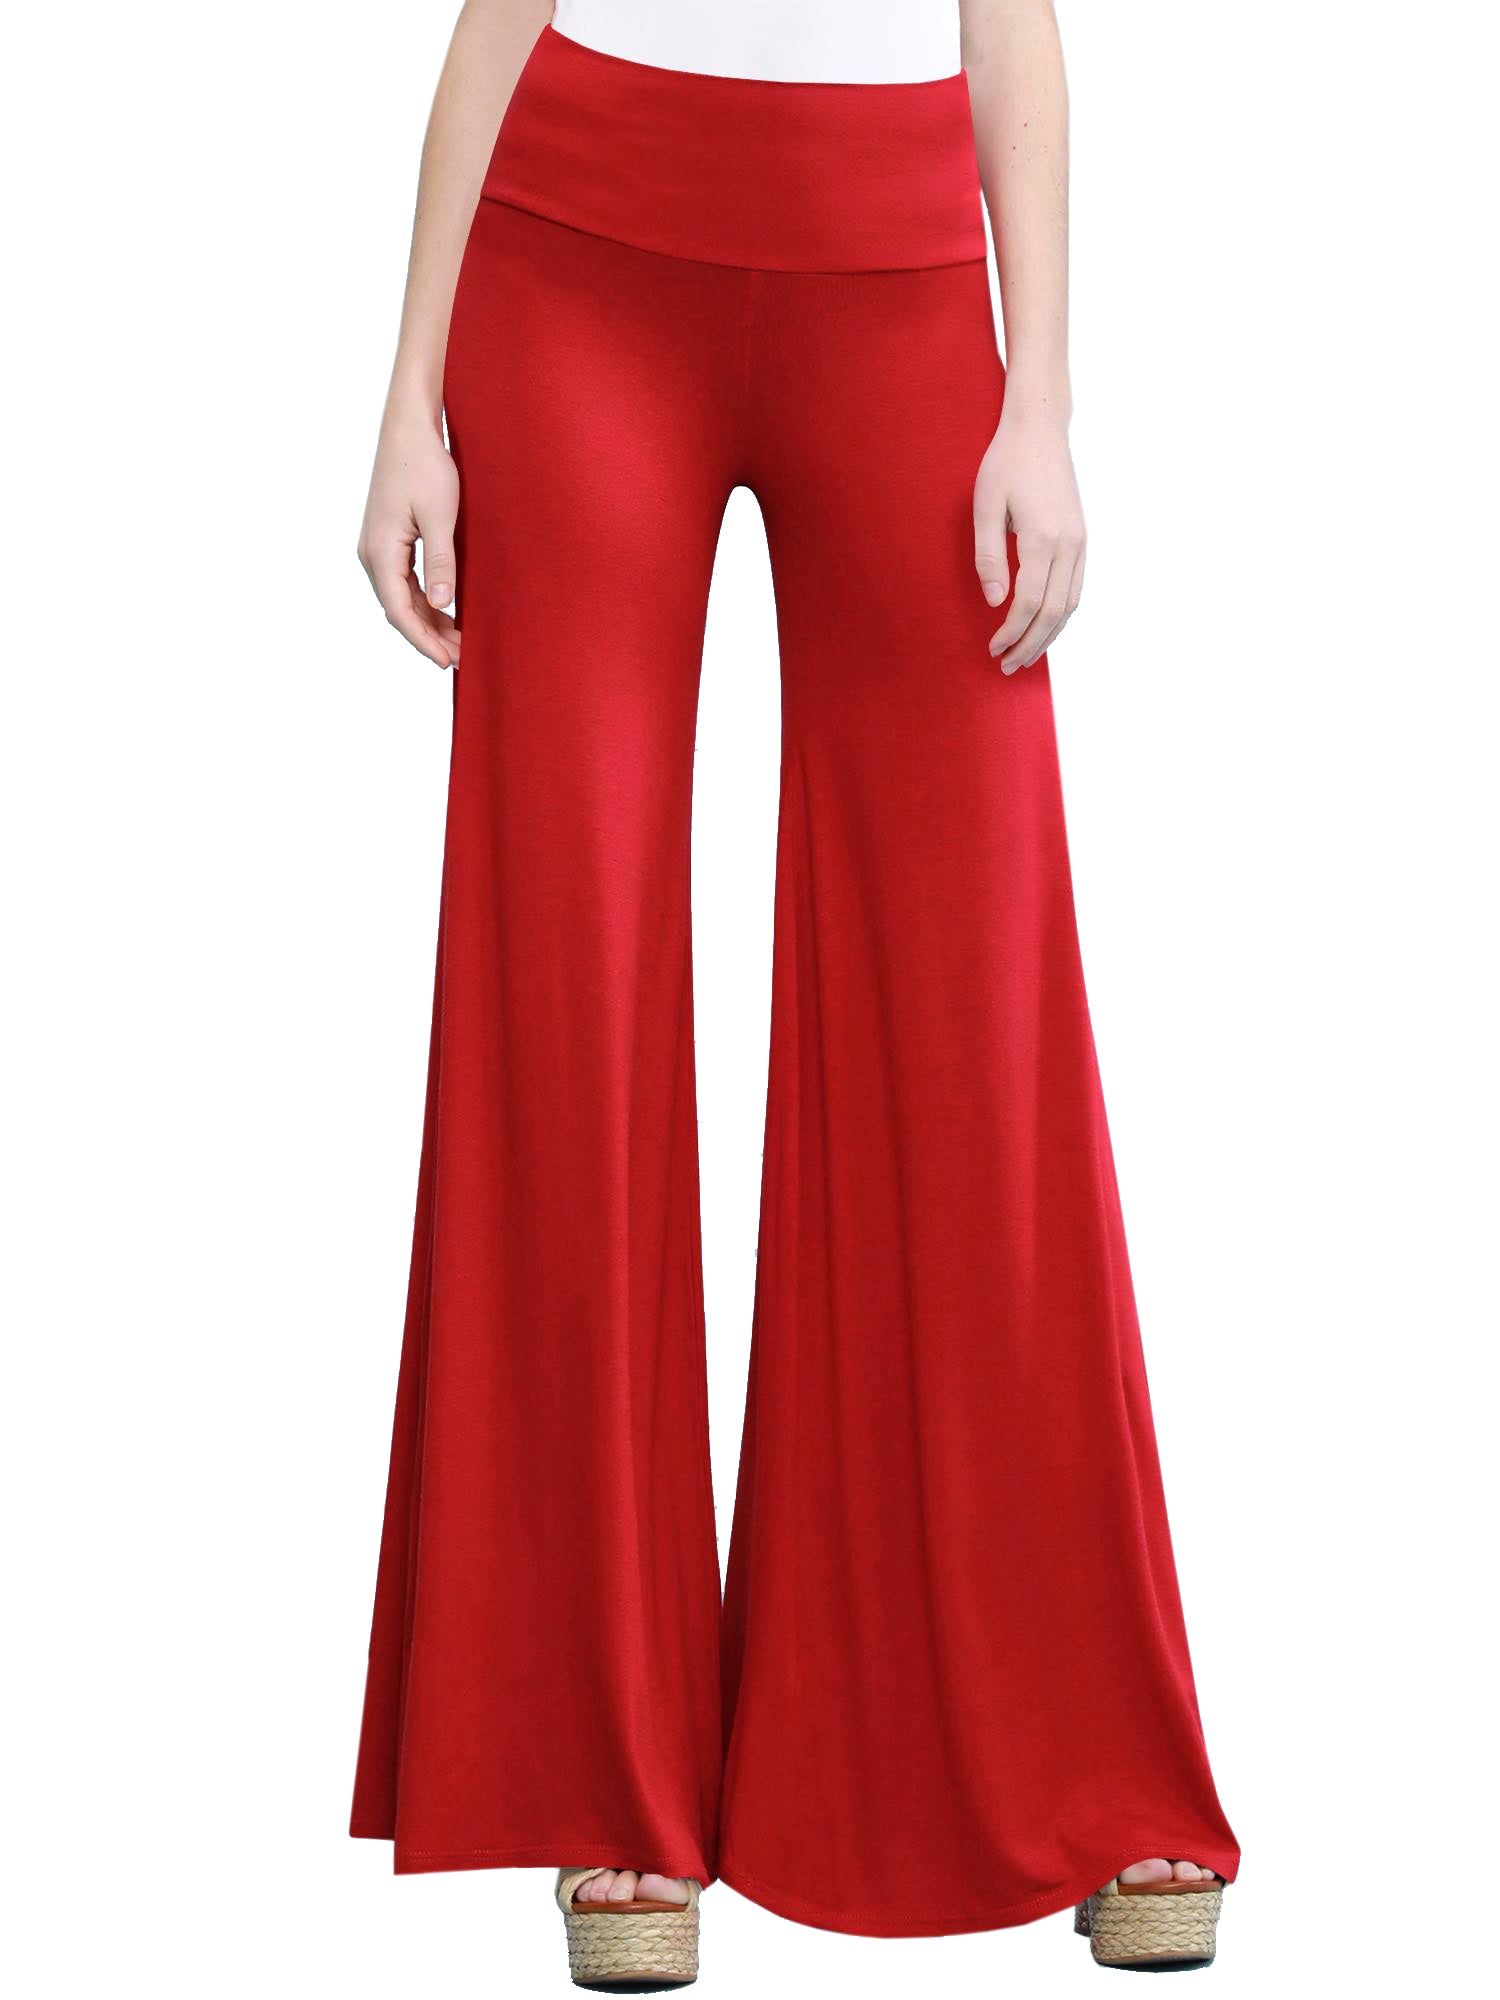 Fashion Secrets: What to Wear with Palazzo Pants